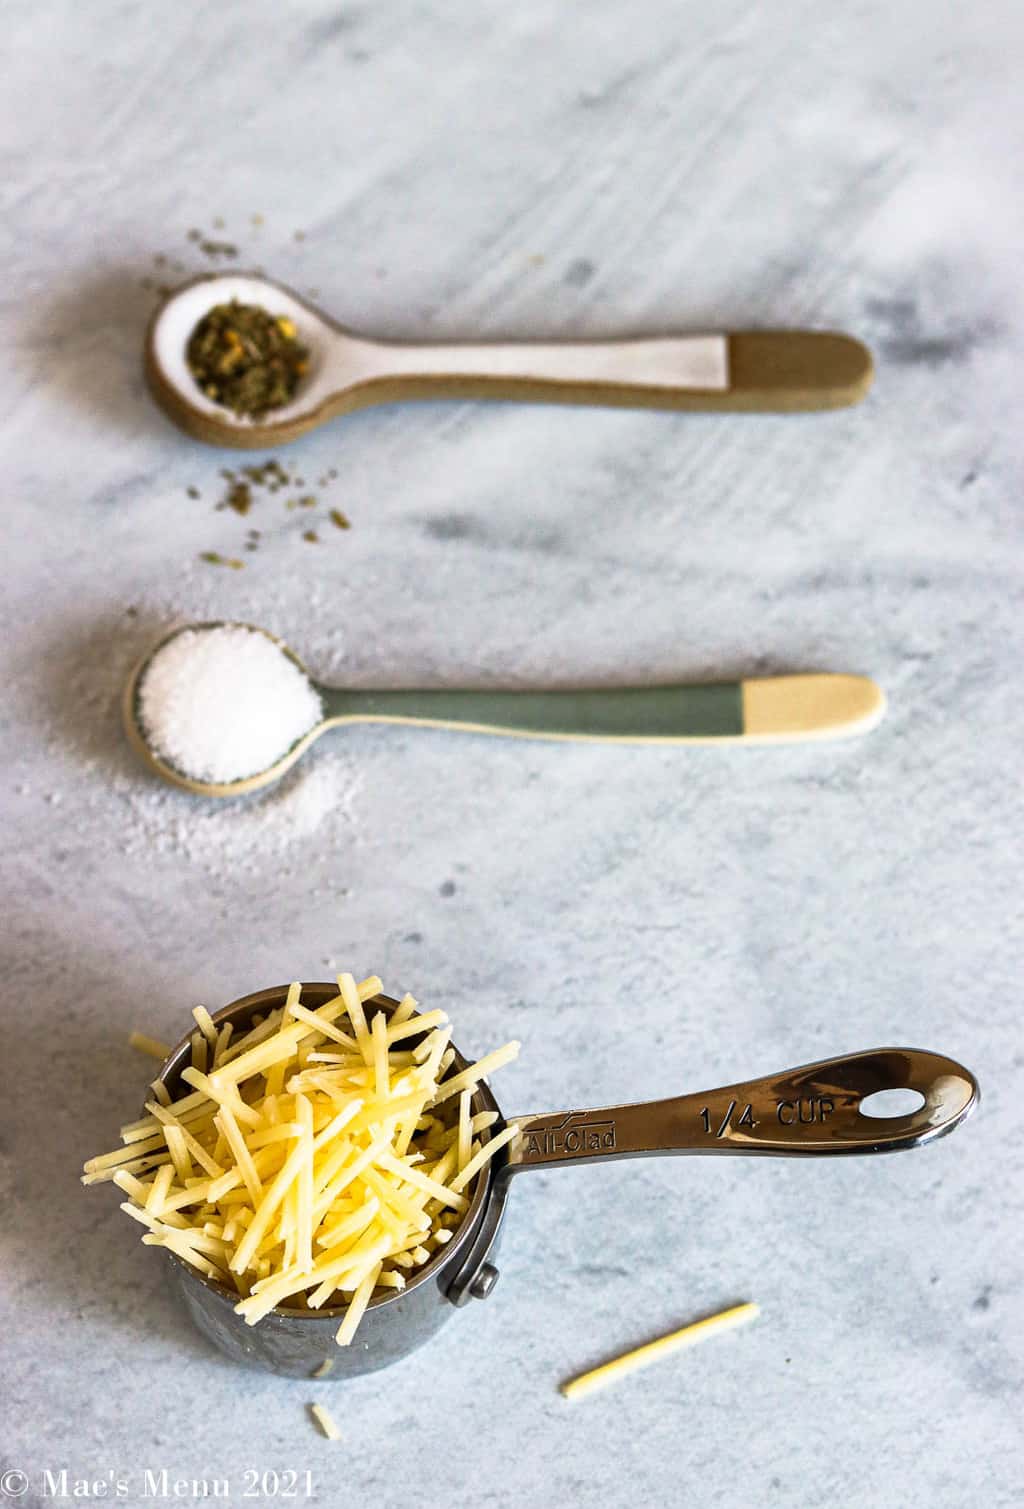 Two small spoons of salt and spices next to a small measuring cup of grated parmesan cheese